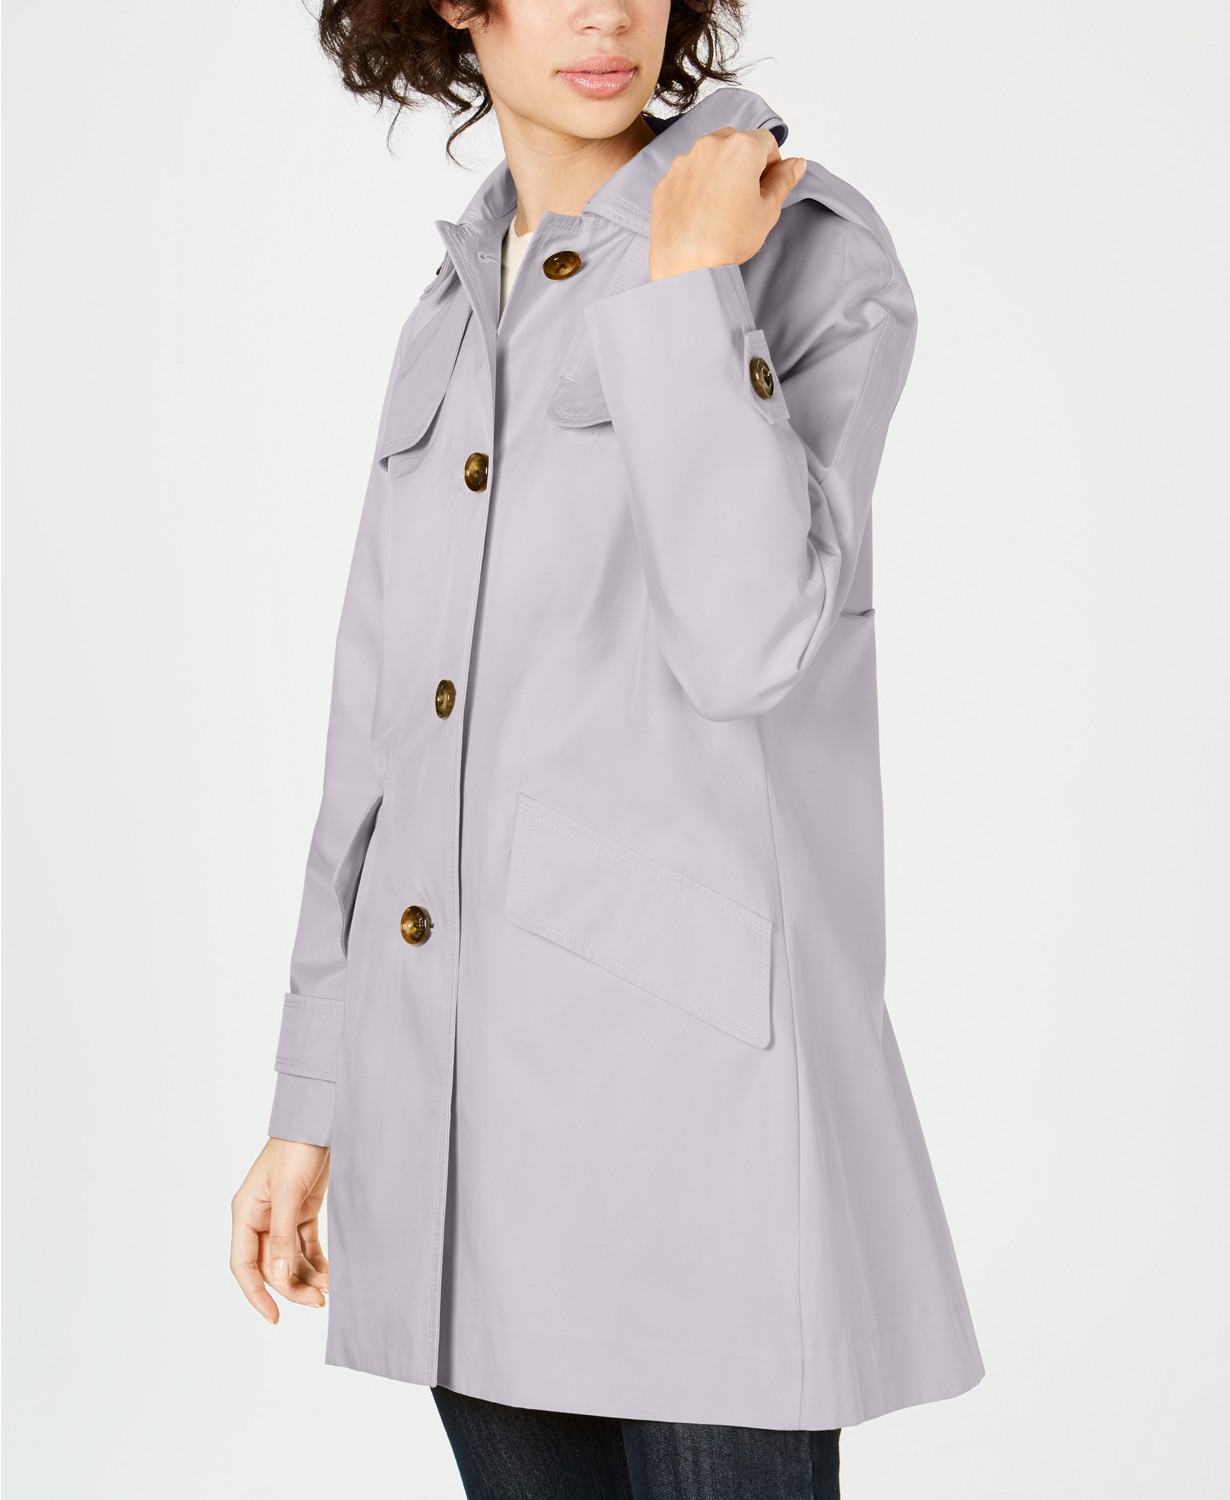 www.couturepoint.com-london-fog-womens-beige-hooded-water-resistant-raincoat-copy